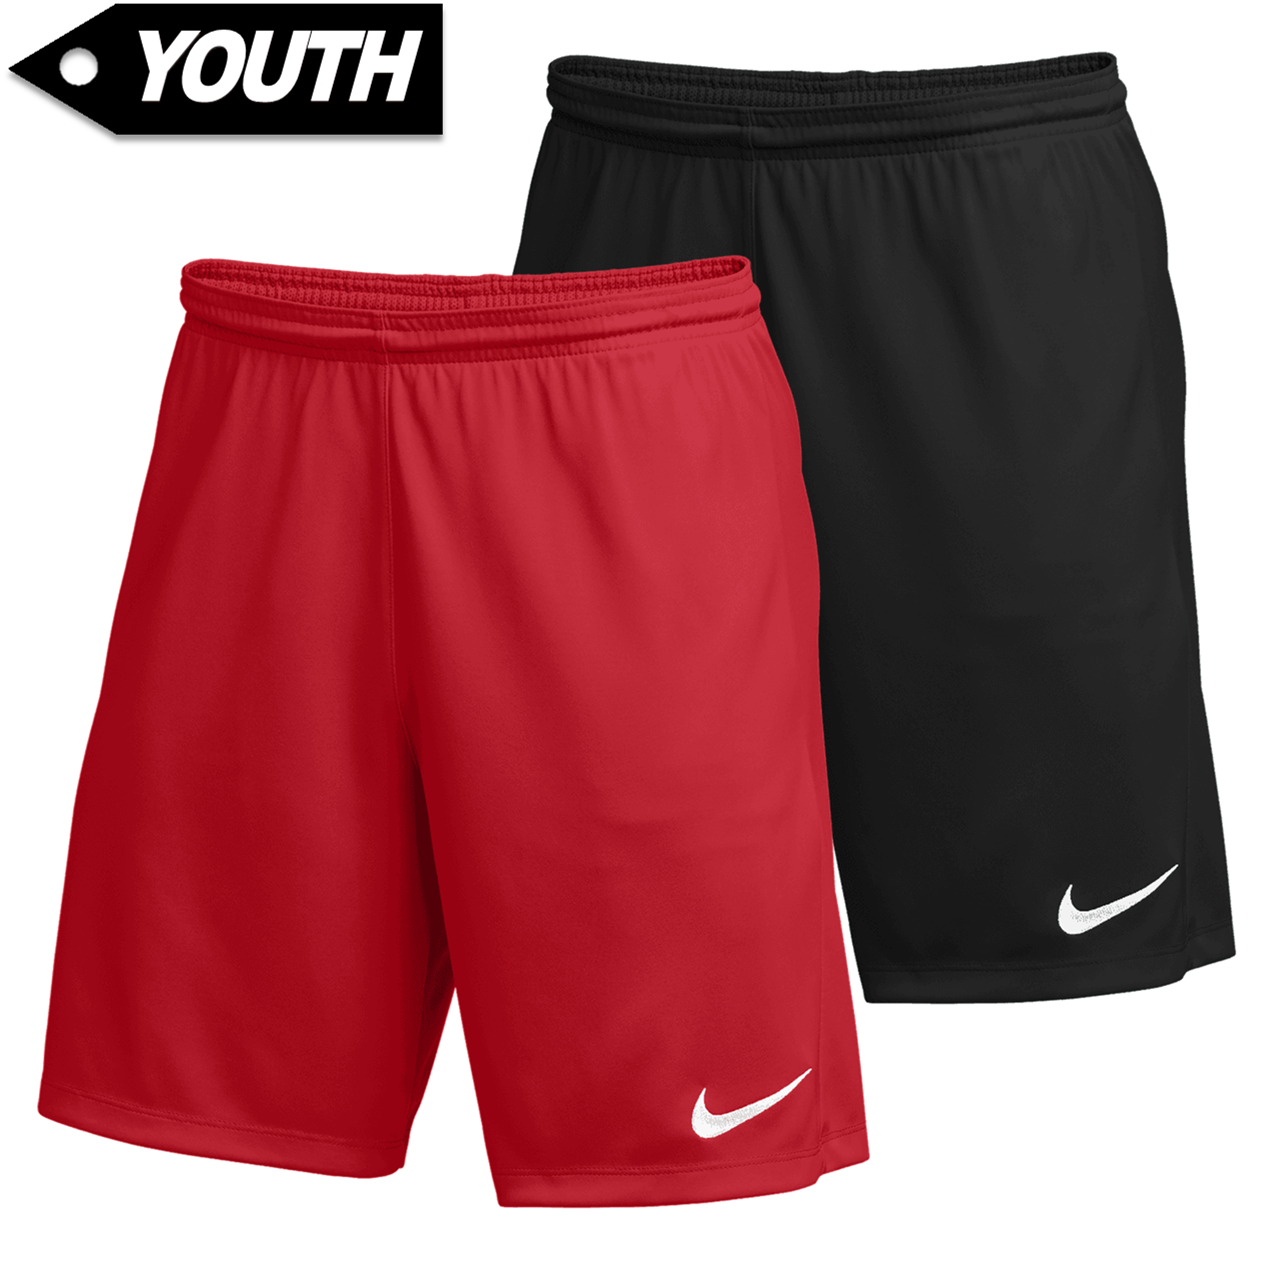 Renegades FC Short [Youth]